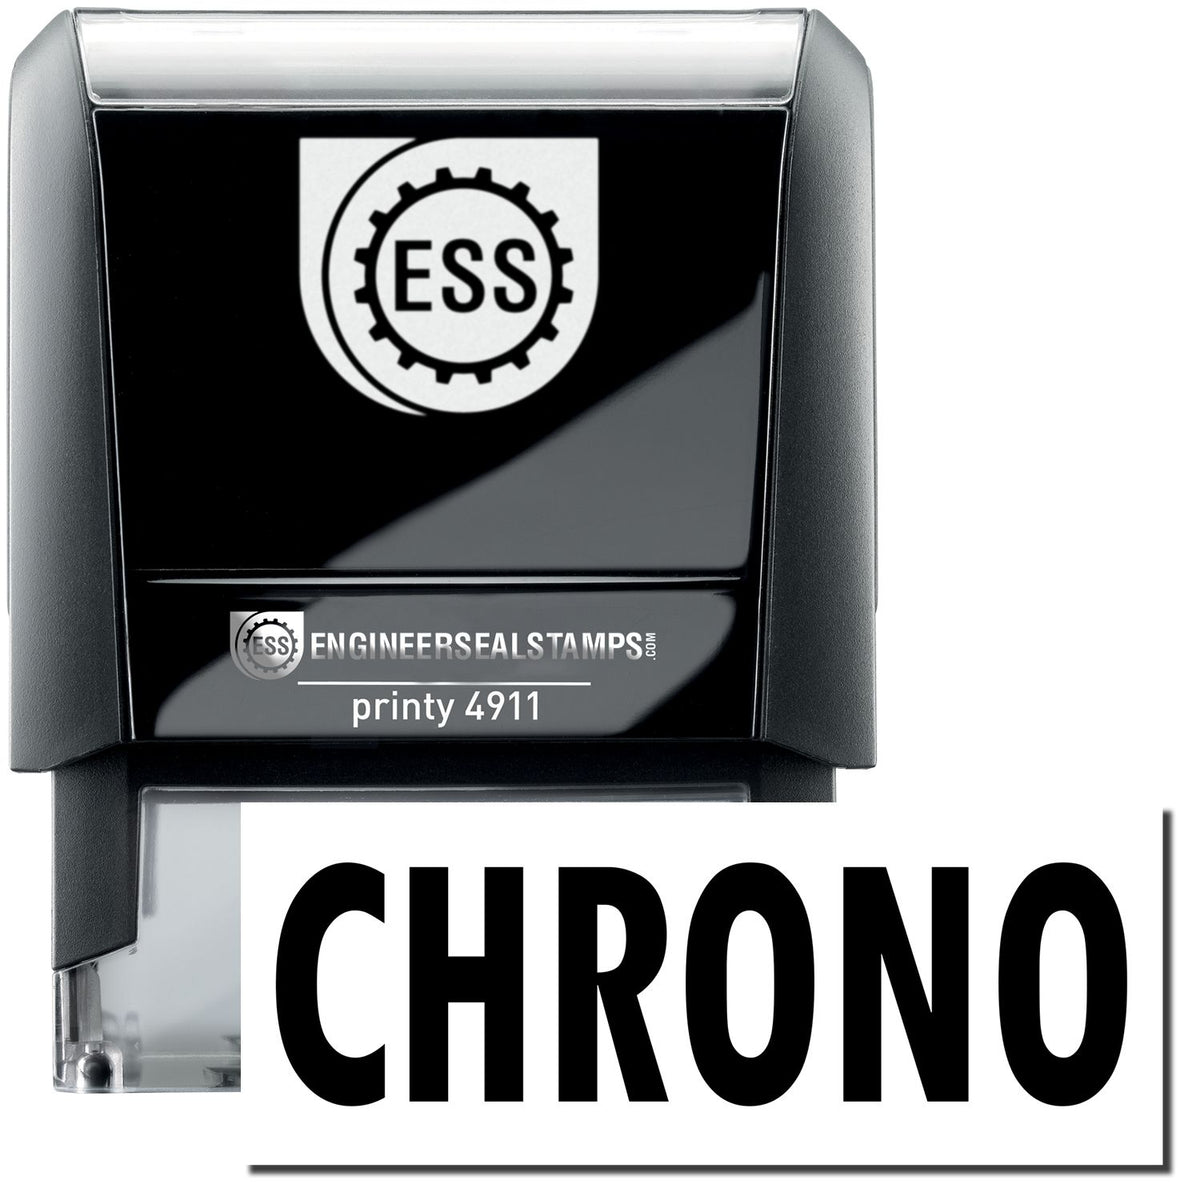 A self-inking stamp with a stamped image showing how the text &quot;CHRONO&quot; is displayed after stamping.